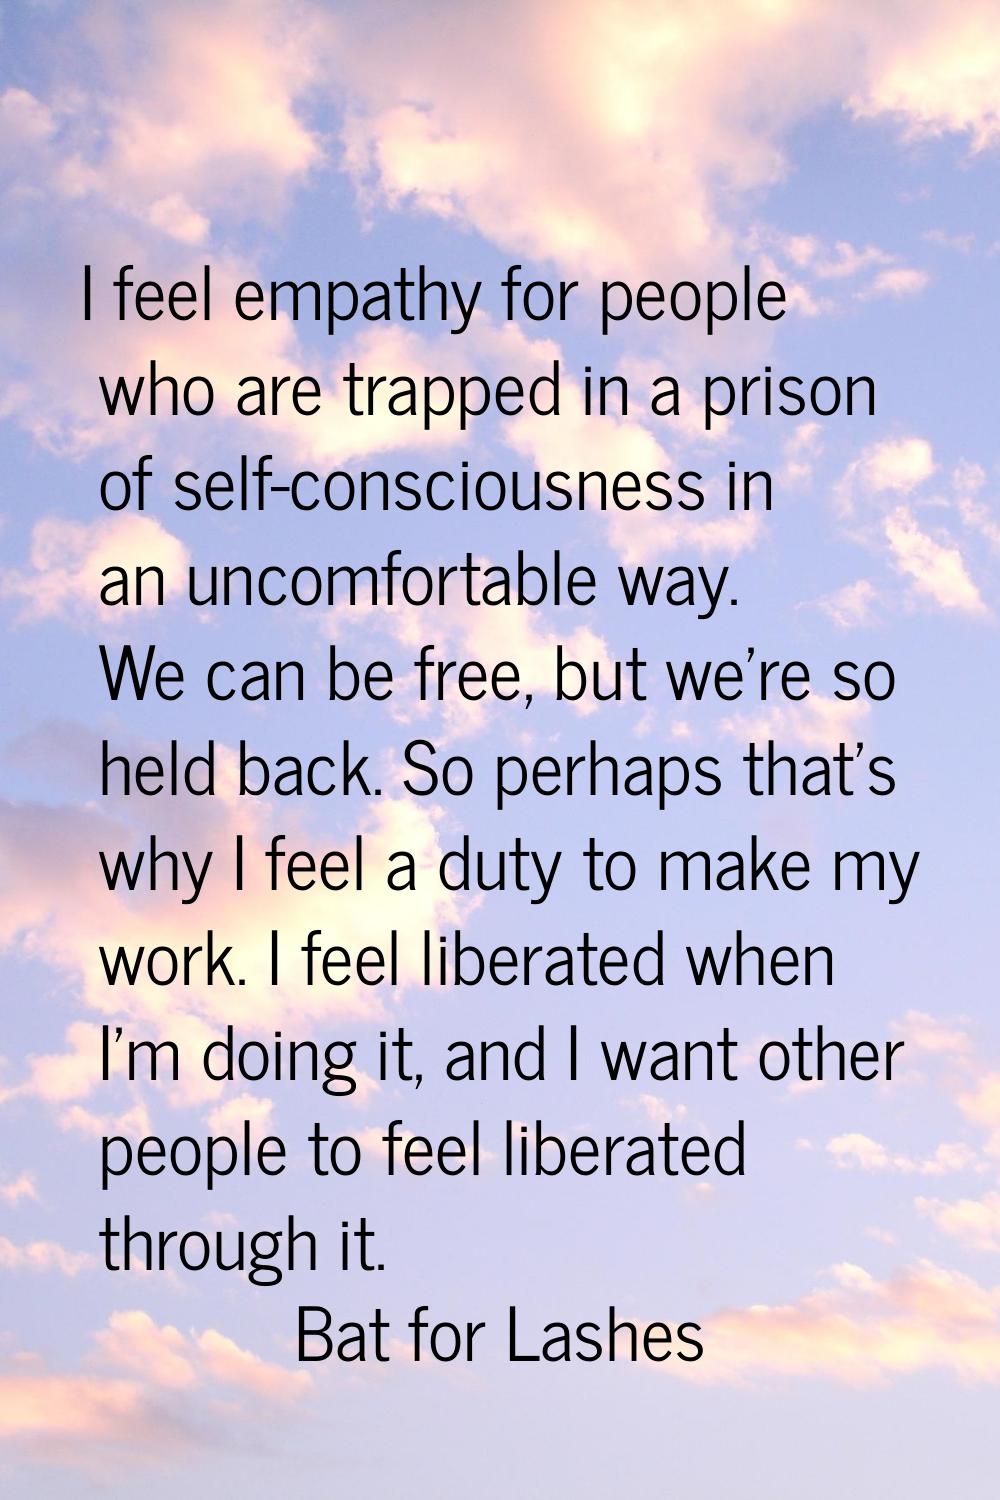 I feel empathy for people who are trapped in a prison of self-consciousness in an uncomfortable way